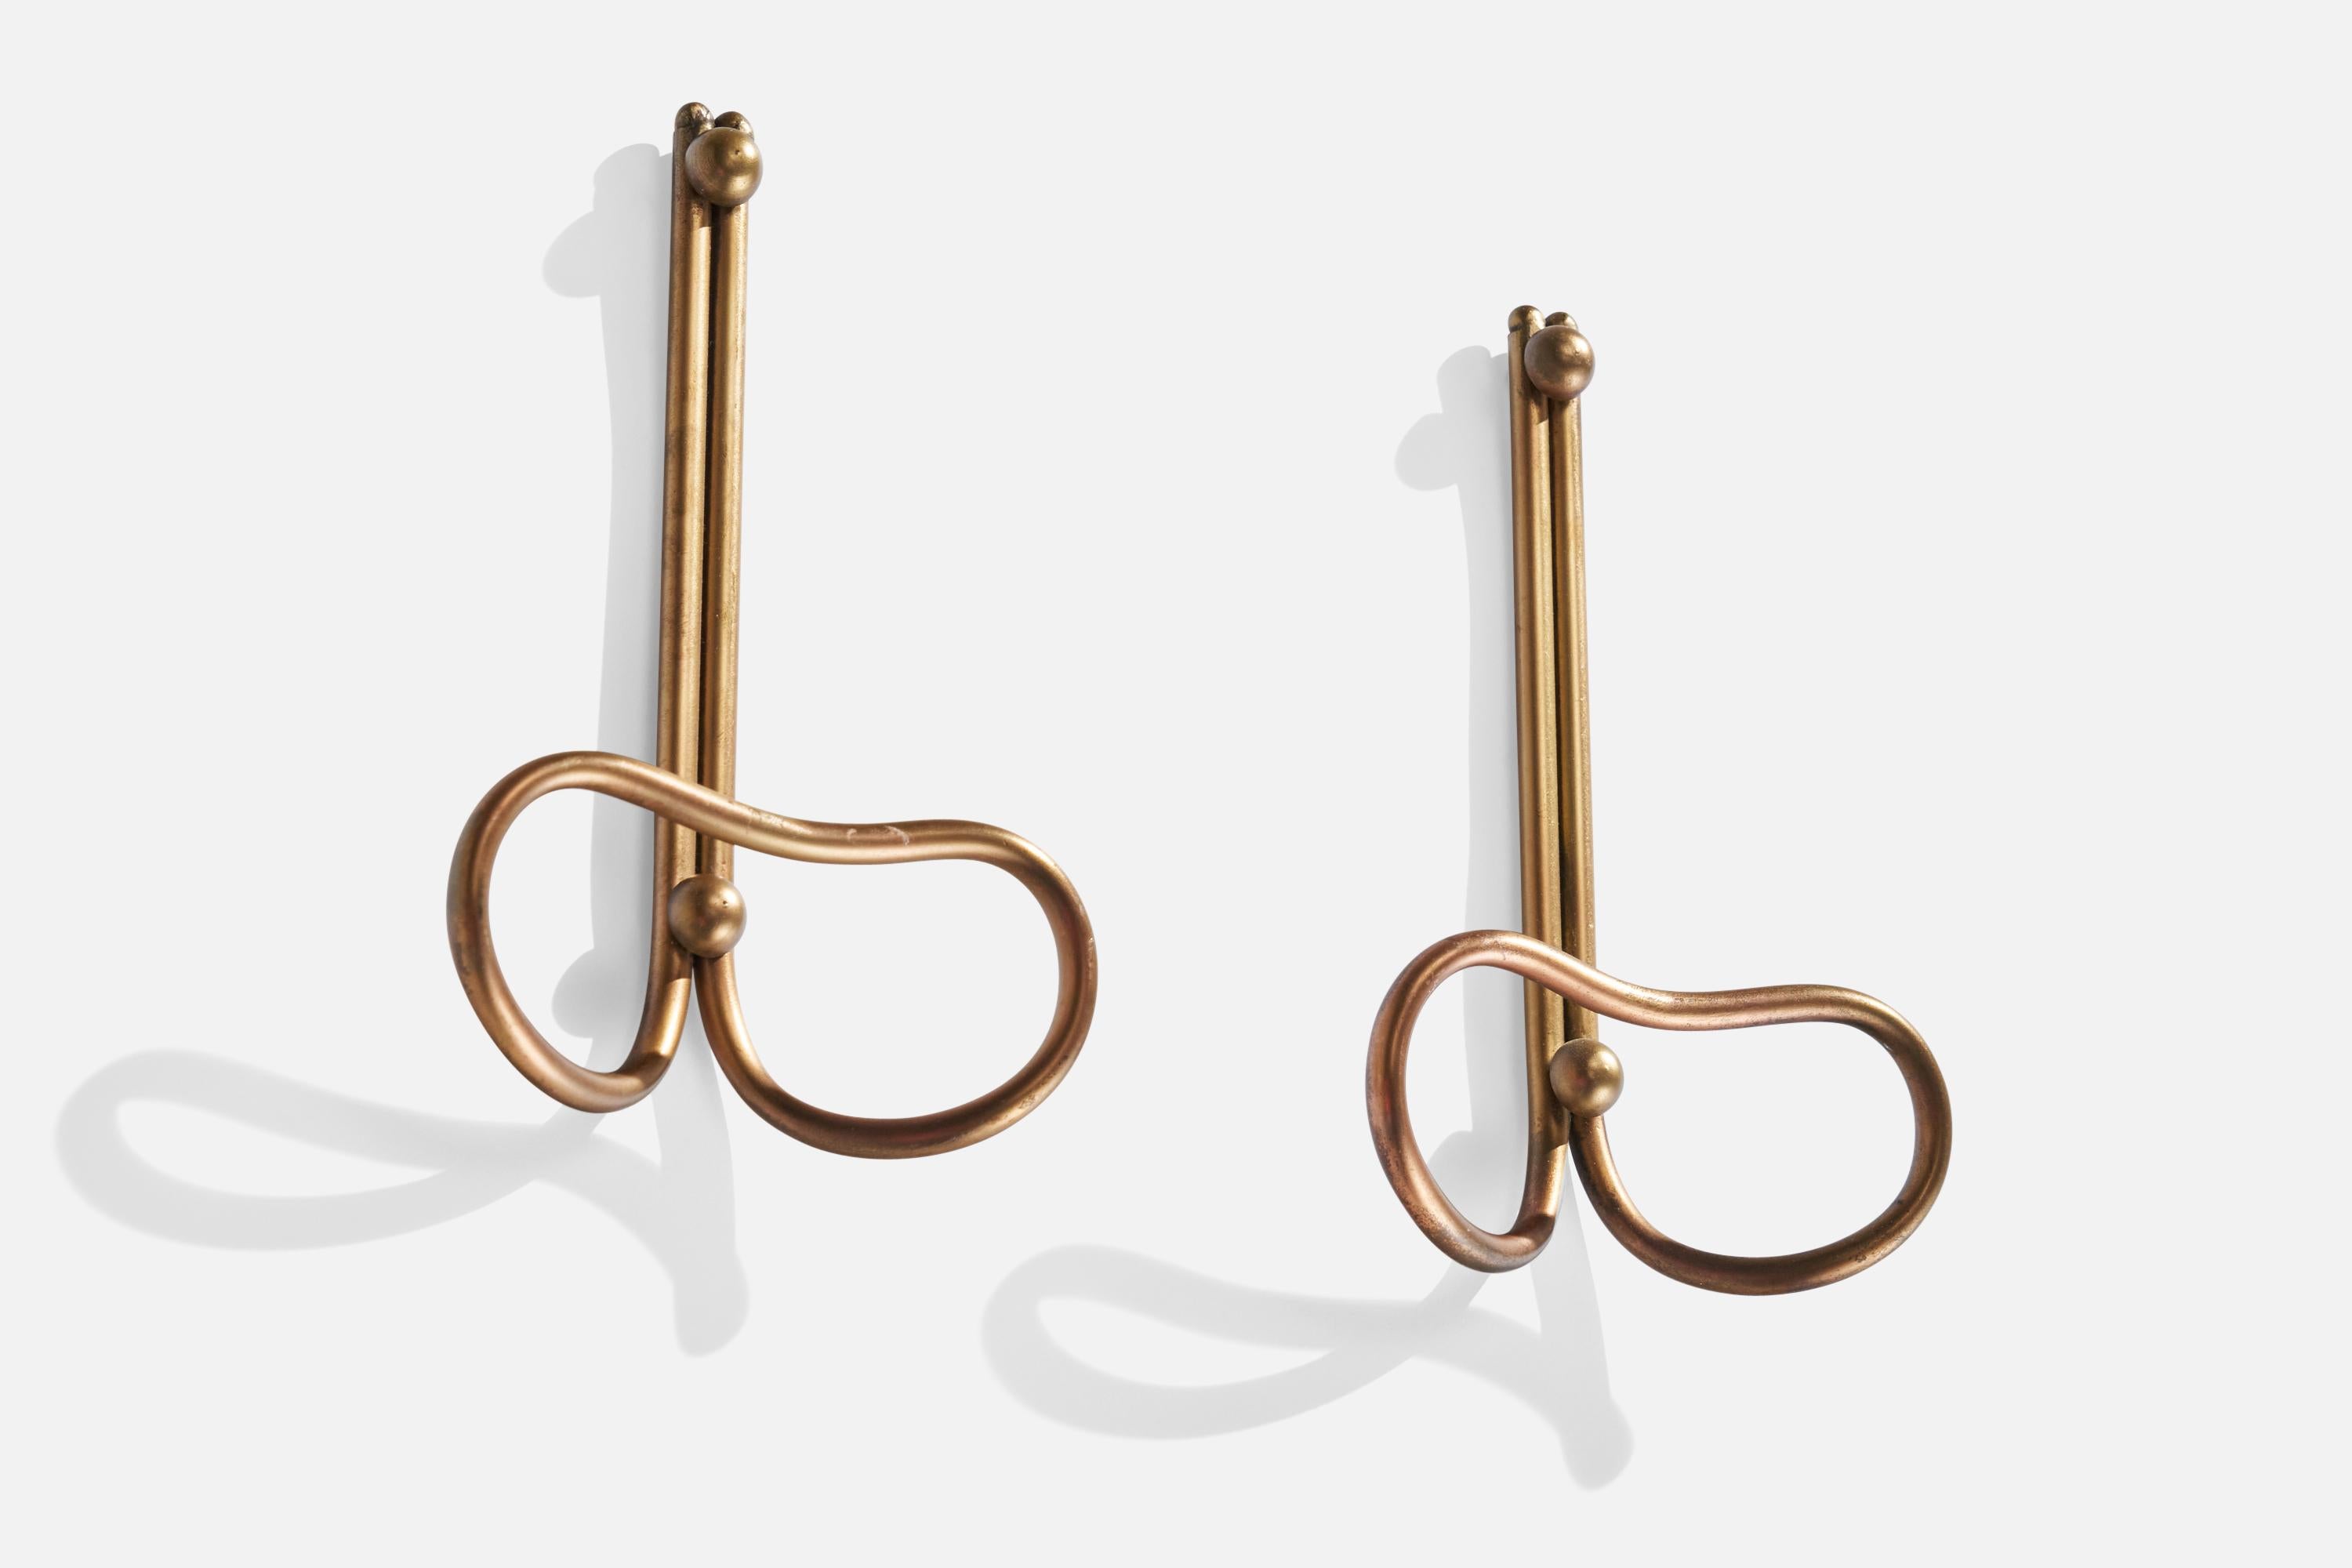 A pair of brass coat hangers designed and produced in Italy, 1940s